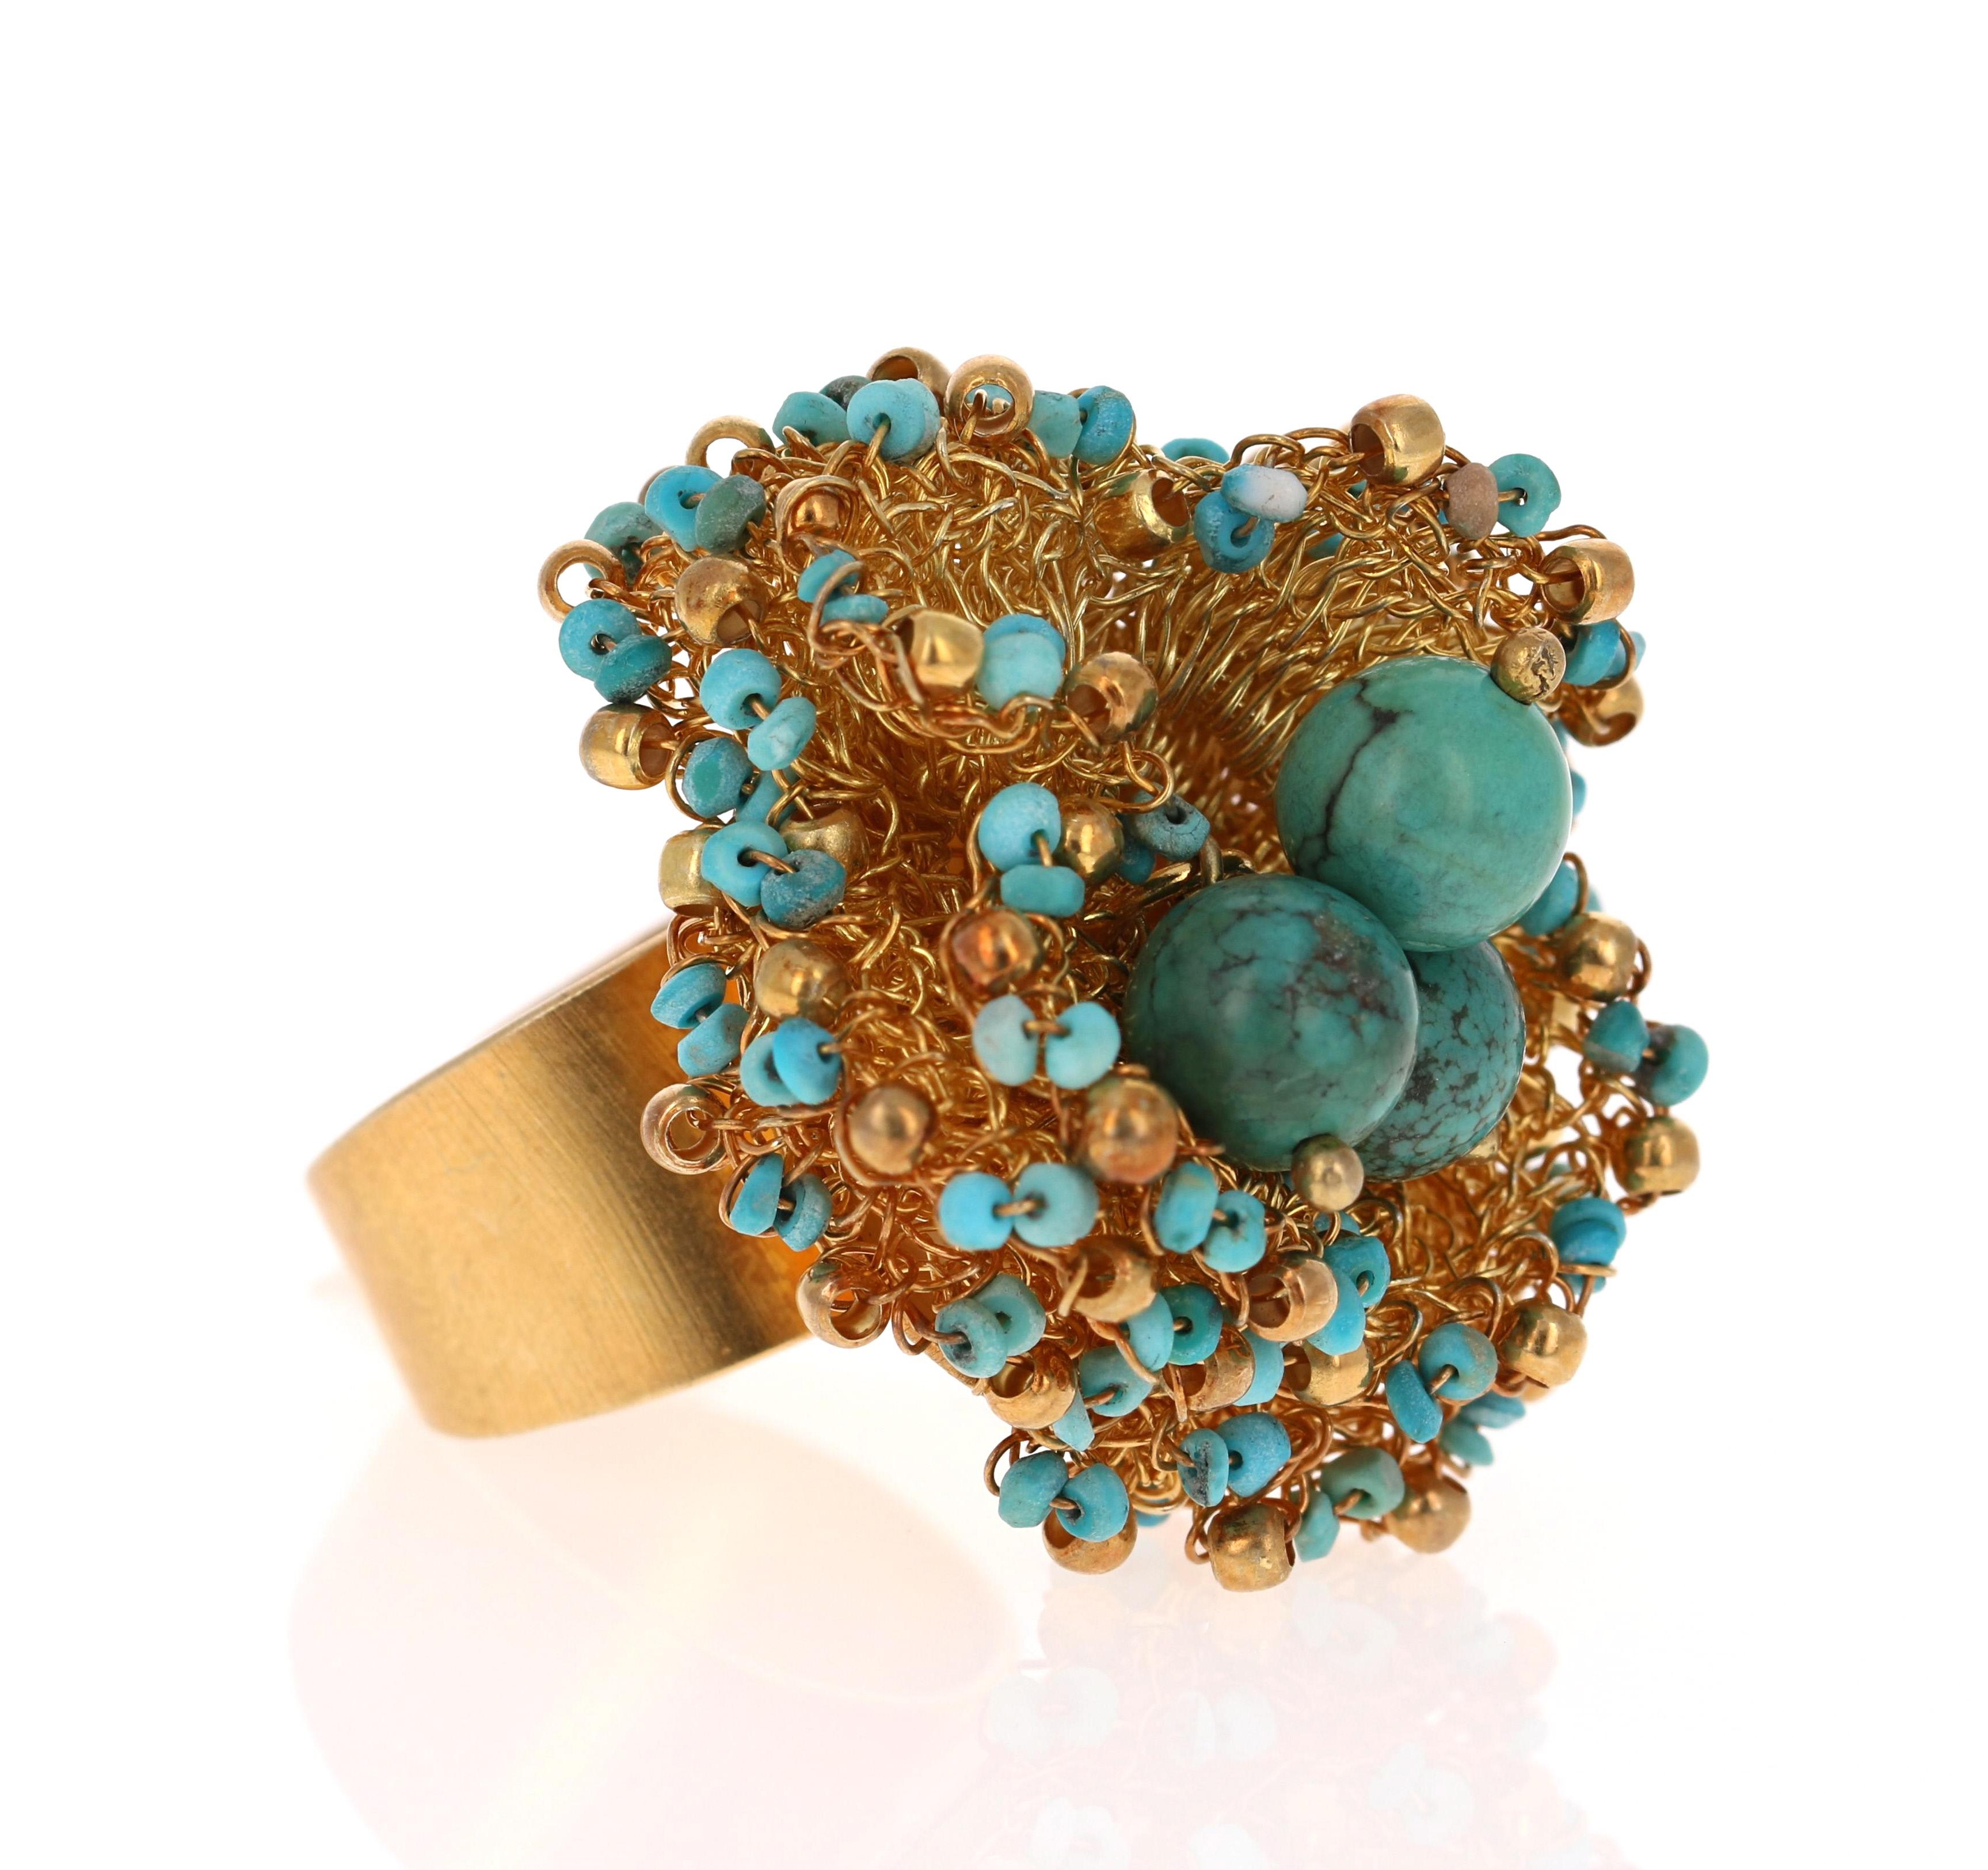 Contemporary Sterling Silver 22 Karat Gold-Plated Genuine Turquoise Ring